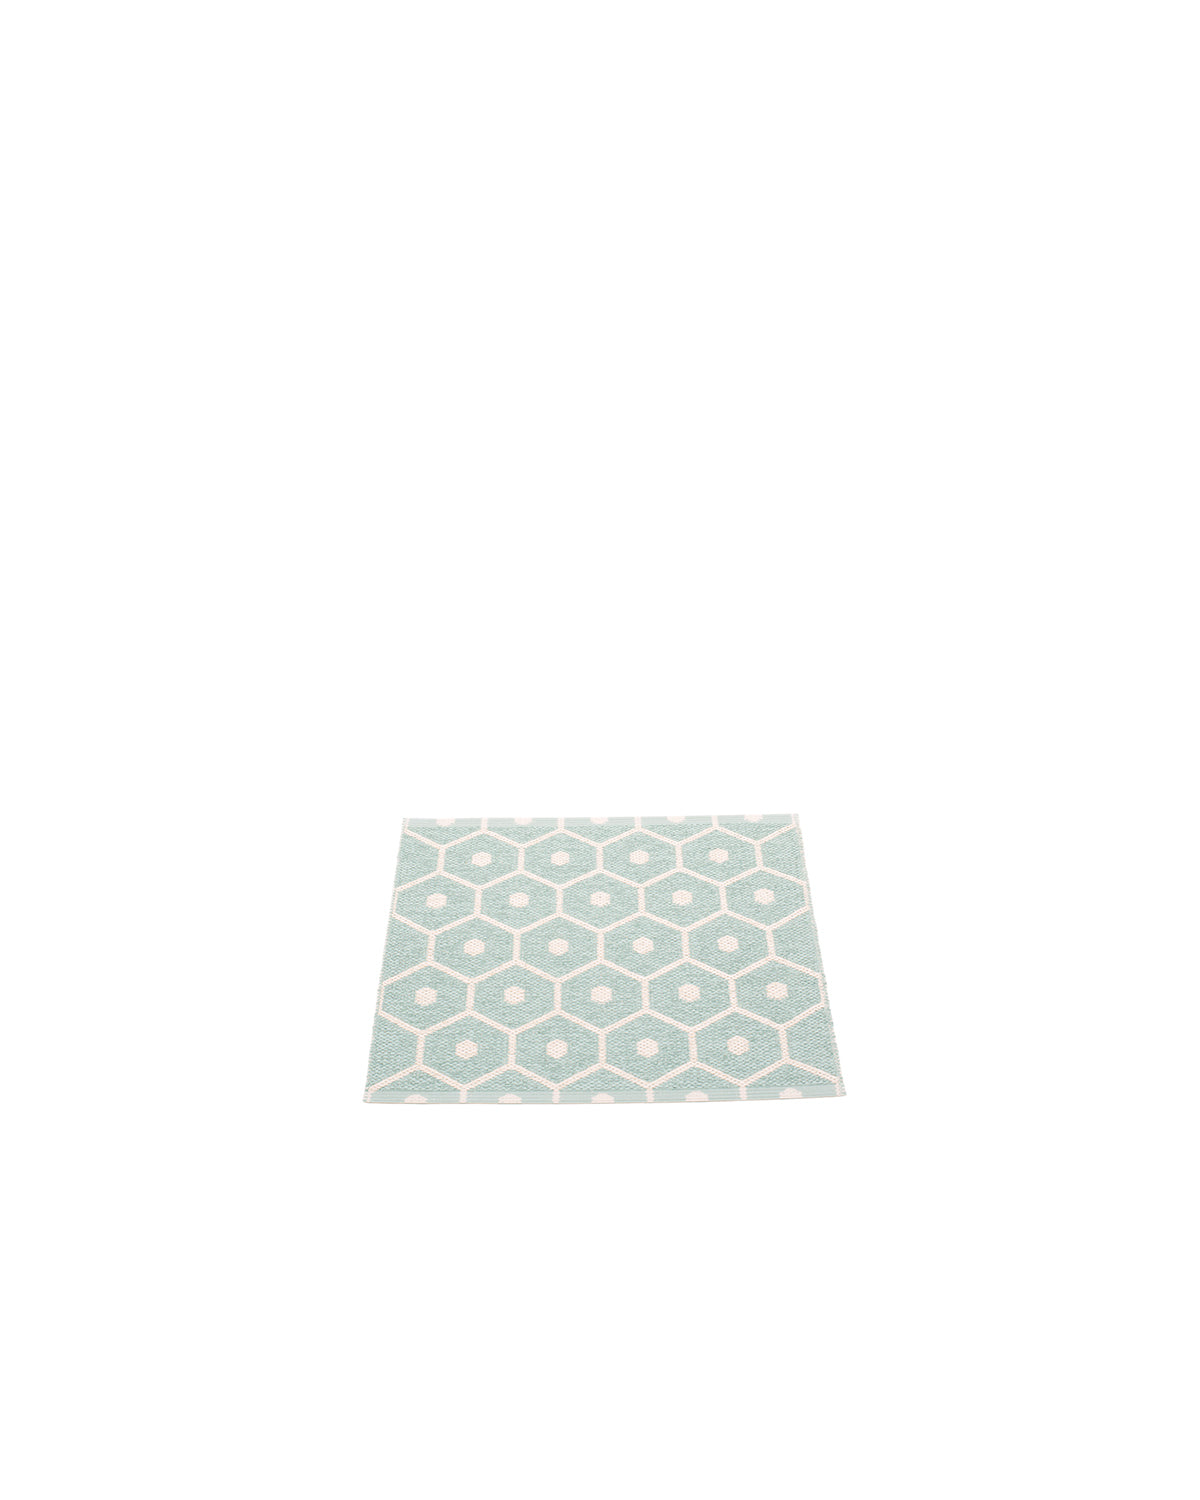 Pappelina Rug HONEY Pale Turquoise  image 3